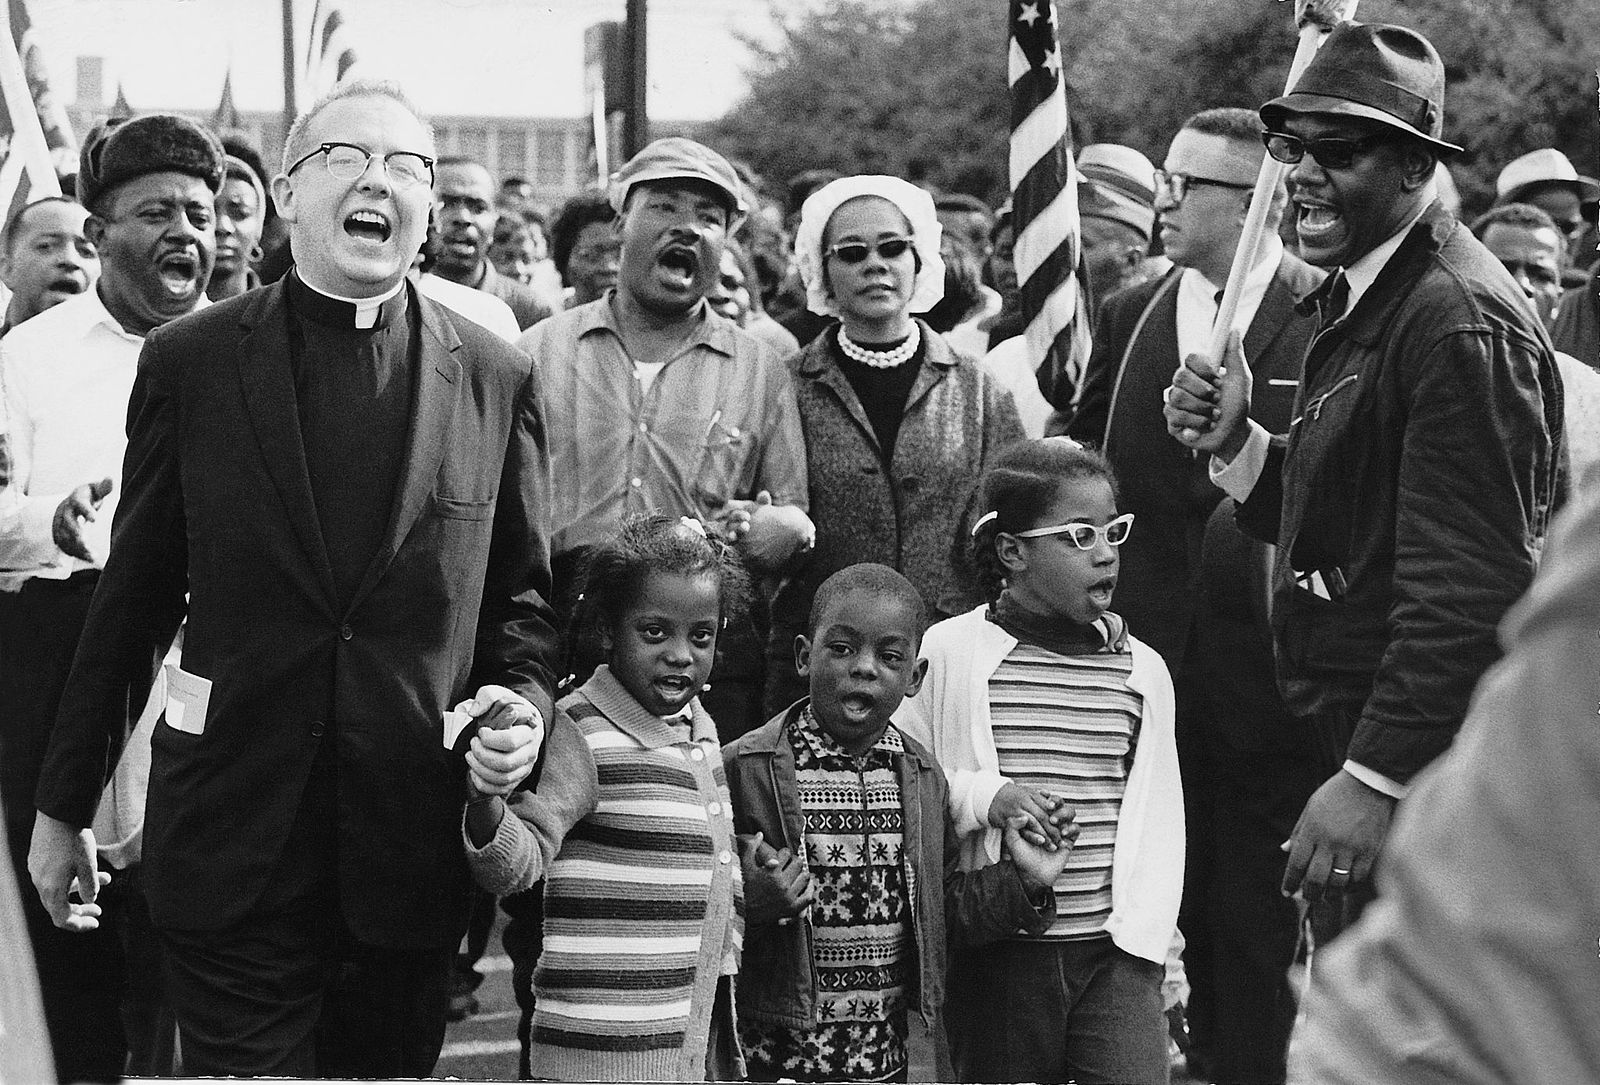 Dr. Ralph David Abernathy and his wife Mrs. Juanita Abernathy and their children with Dr. and Mrs. Martin Luther King march on the front line, leading the SELMA TO MONTGOMERY MARCH in 1965 for voting rights.